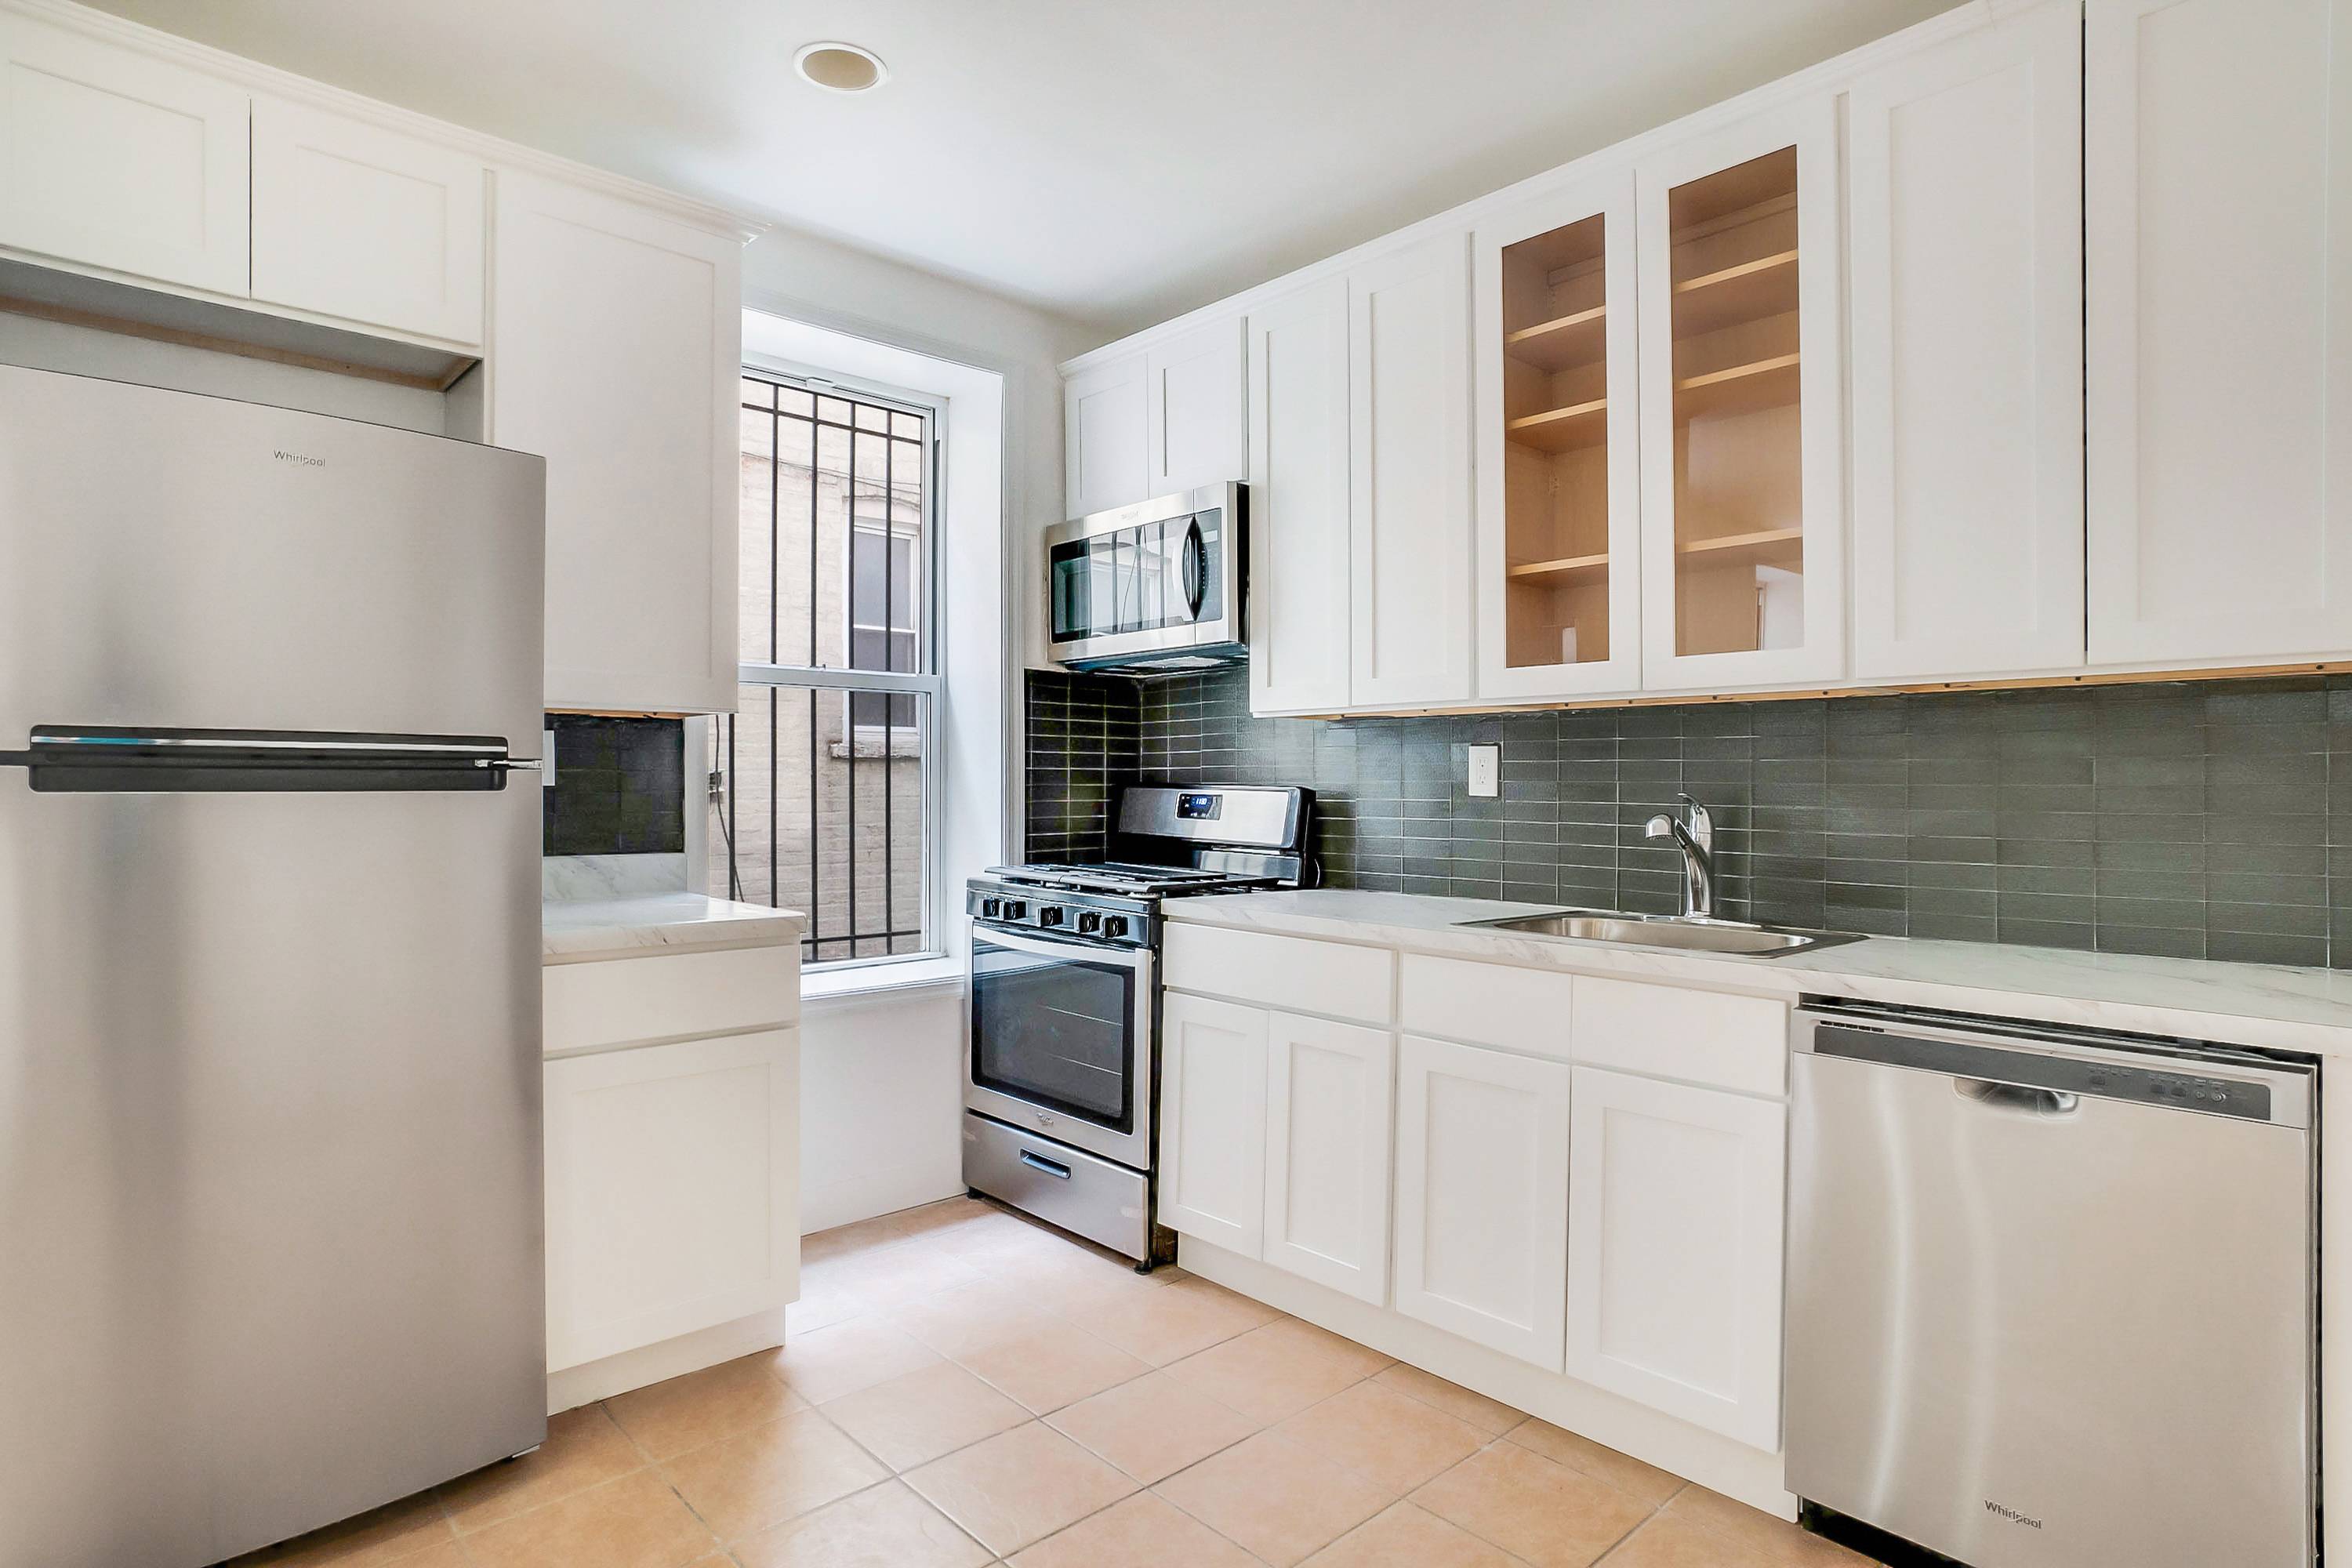 Gut Renovated First Floor 3 Bed / 1.5 Bath Apt in Crown Heights